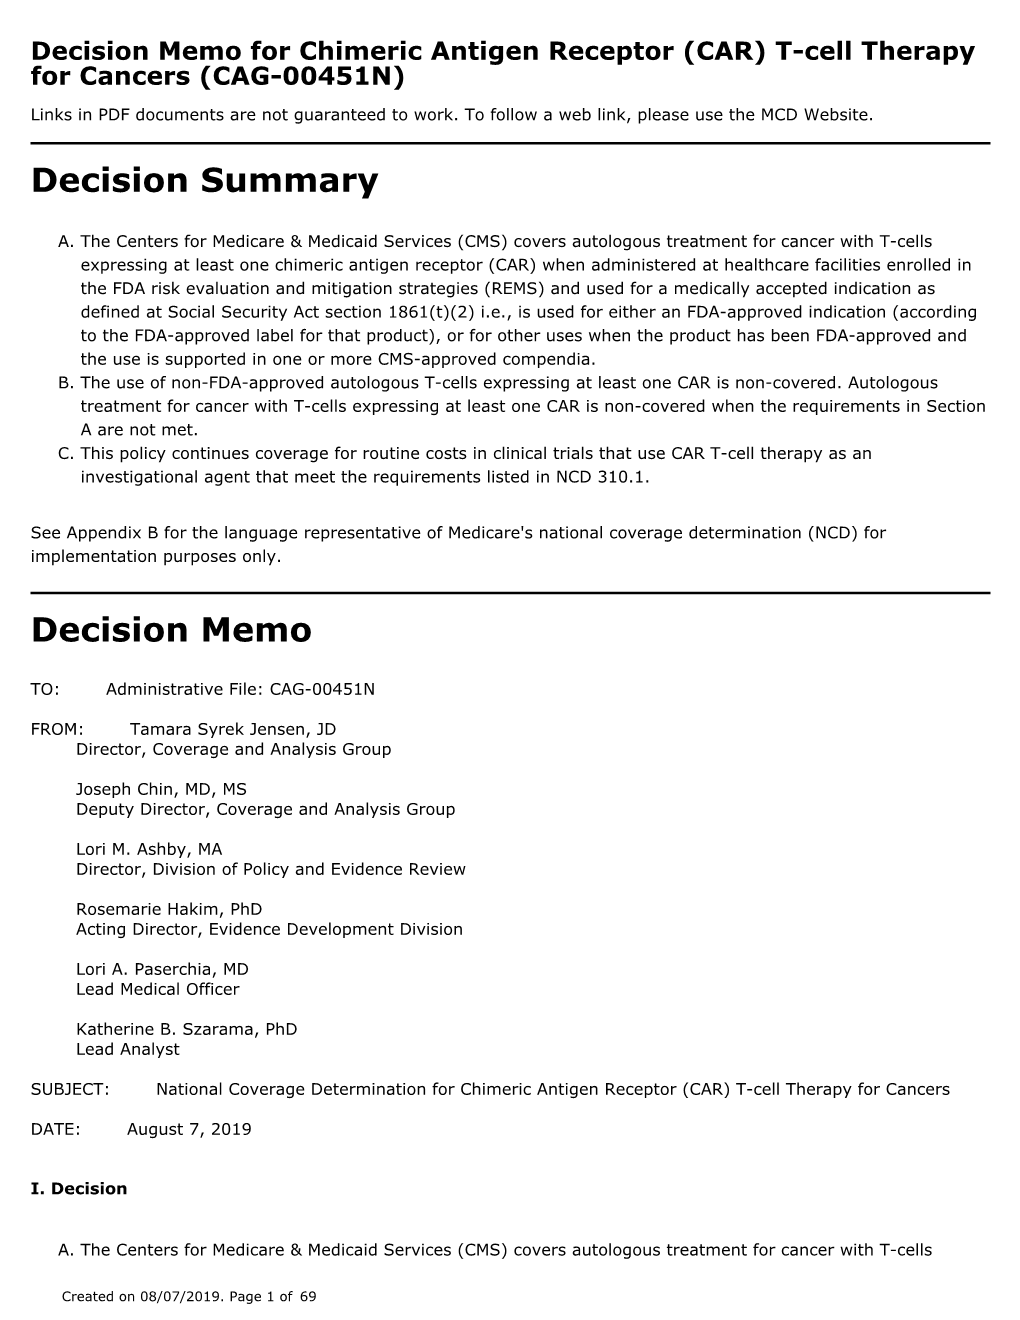 Decision Memo for Chimeric Antigen Receptor (CAR) T-Cell Therapy for Cancers (CAG-00451N)